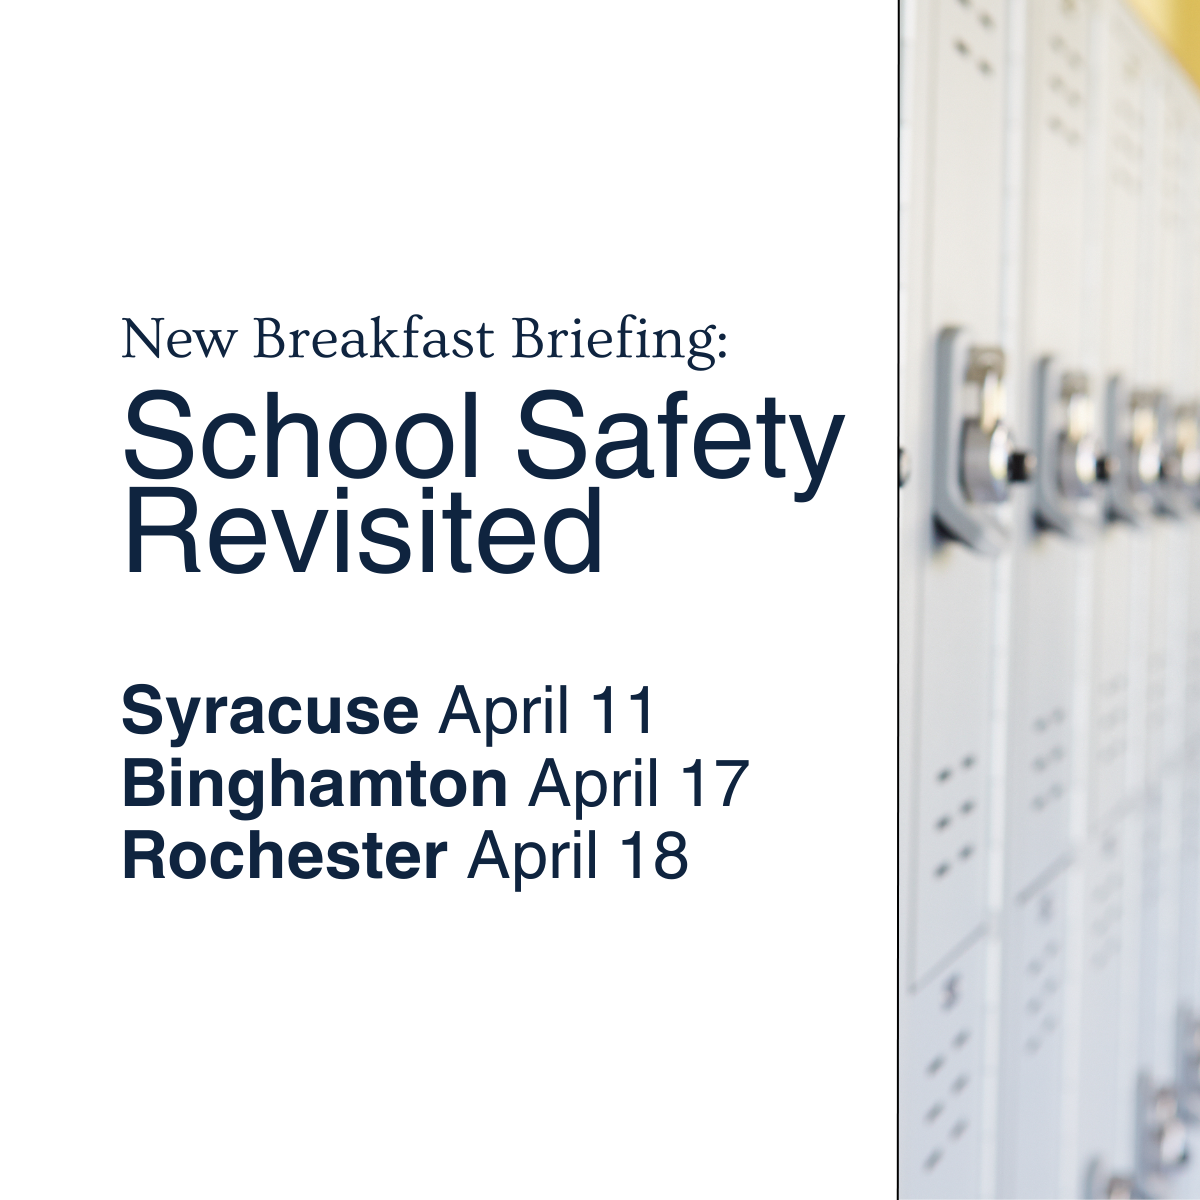 New Breakfast Briefing: School Safety Revisited